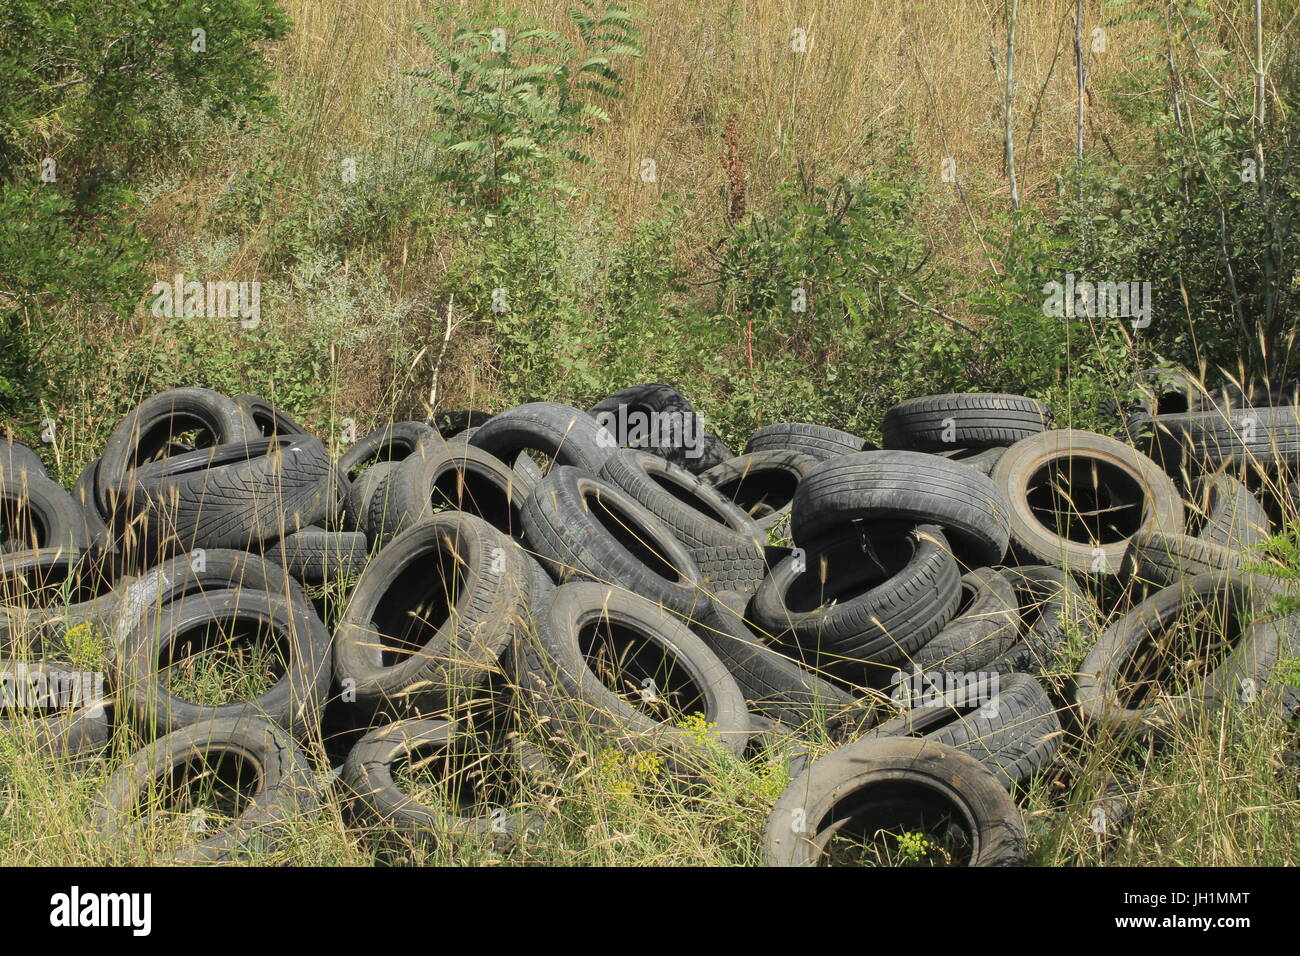 Other peoples rubbish, old dumped tyres or tires. Stock Photo